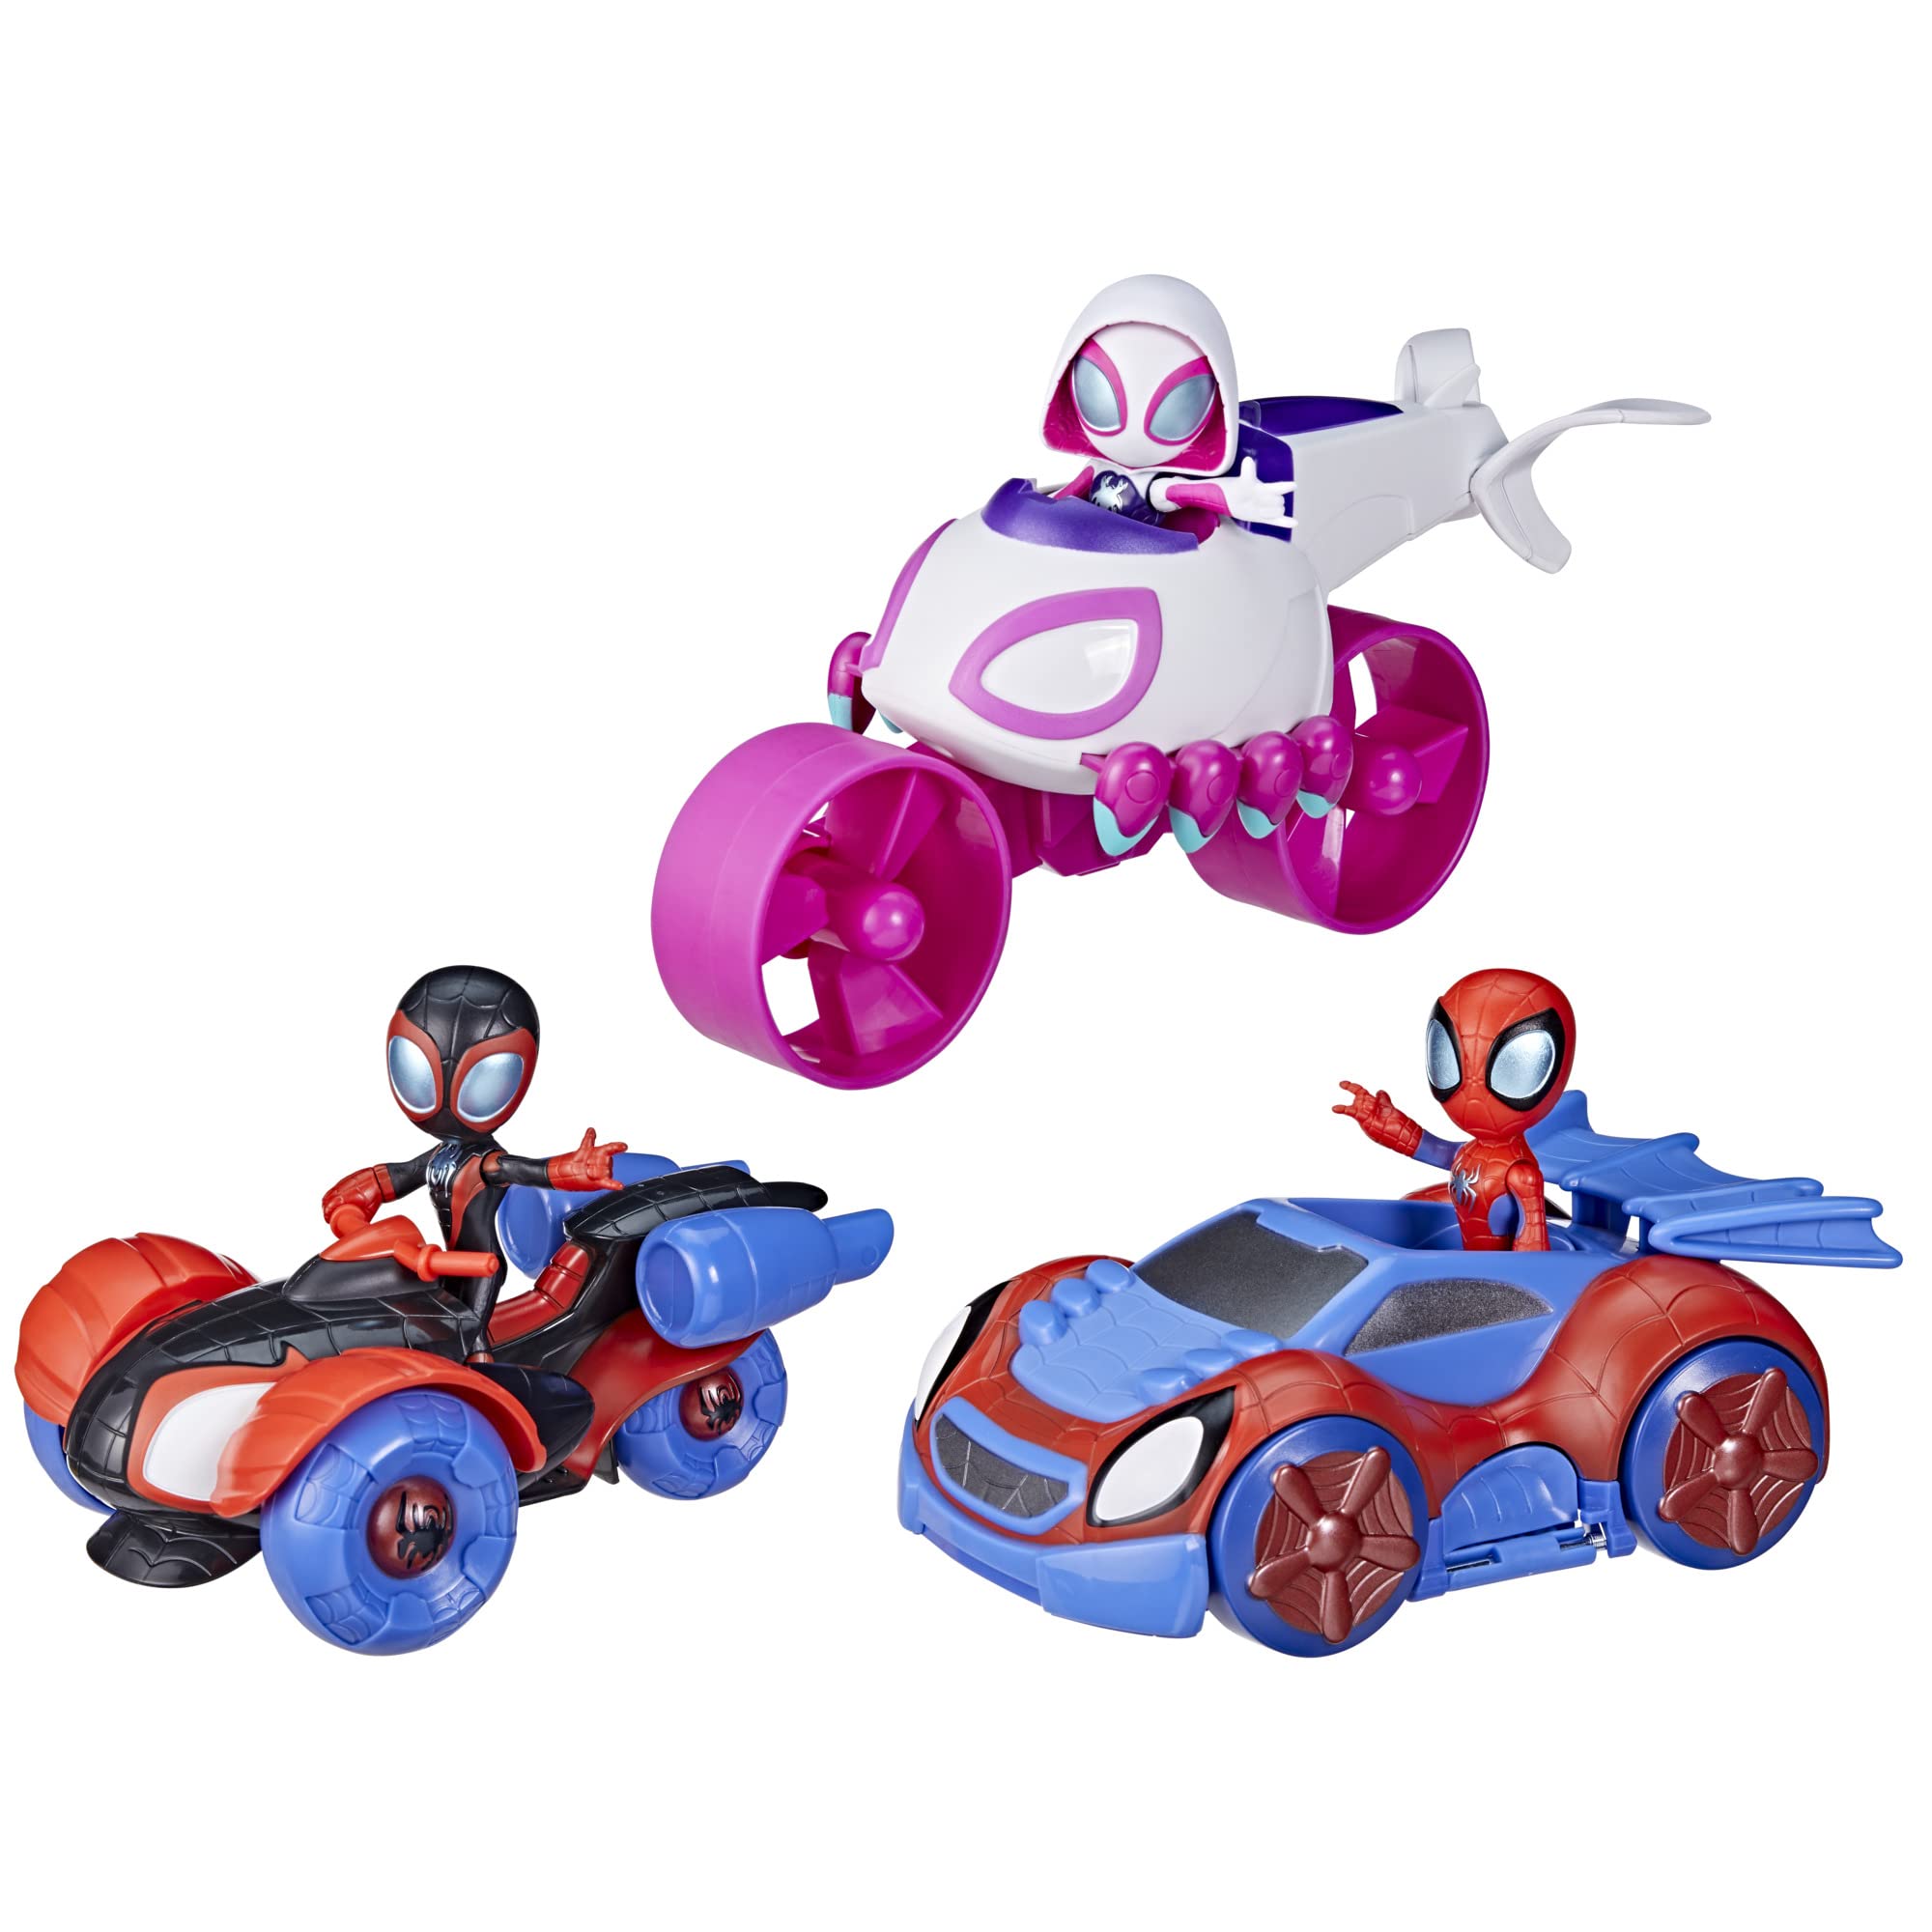 Marvel Spidey and His Amazing Friends Team Spidey Change ‘N Go Riders Playset, 3 Toy Cars and Action Figures, Preschool Toys, Super Hero Toys for 3 Year Old Boys and Girls and Up (Amazon Exclusive)